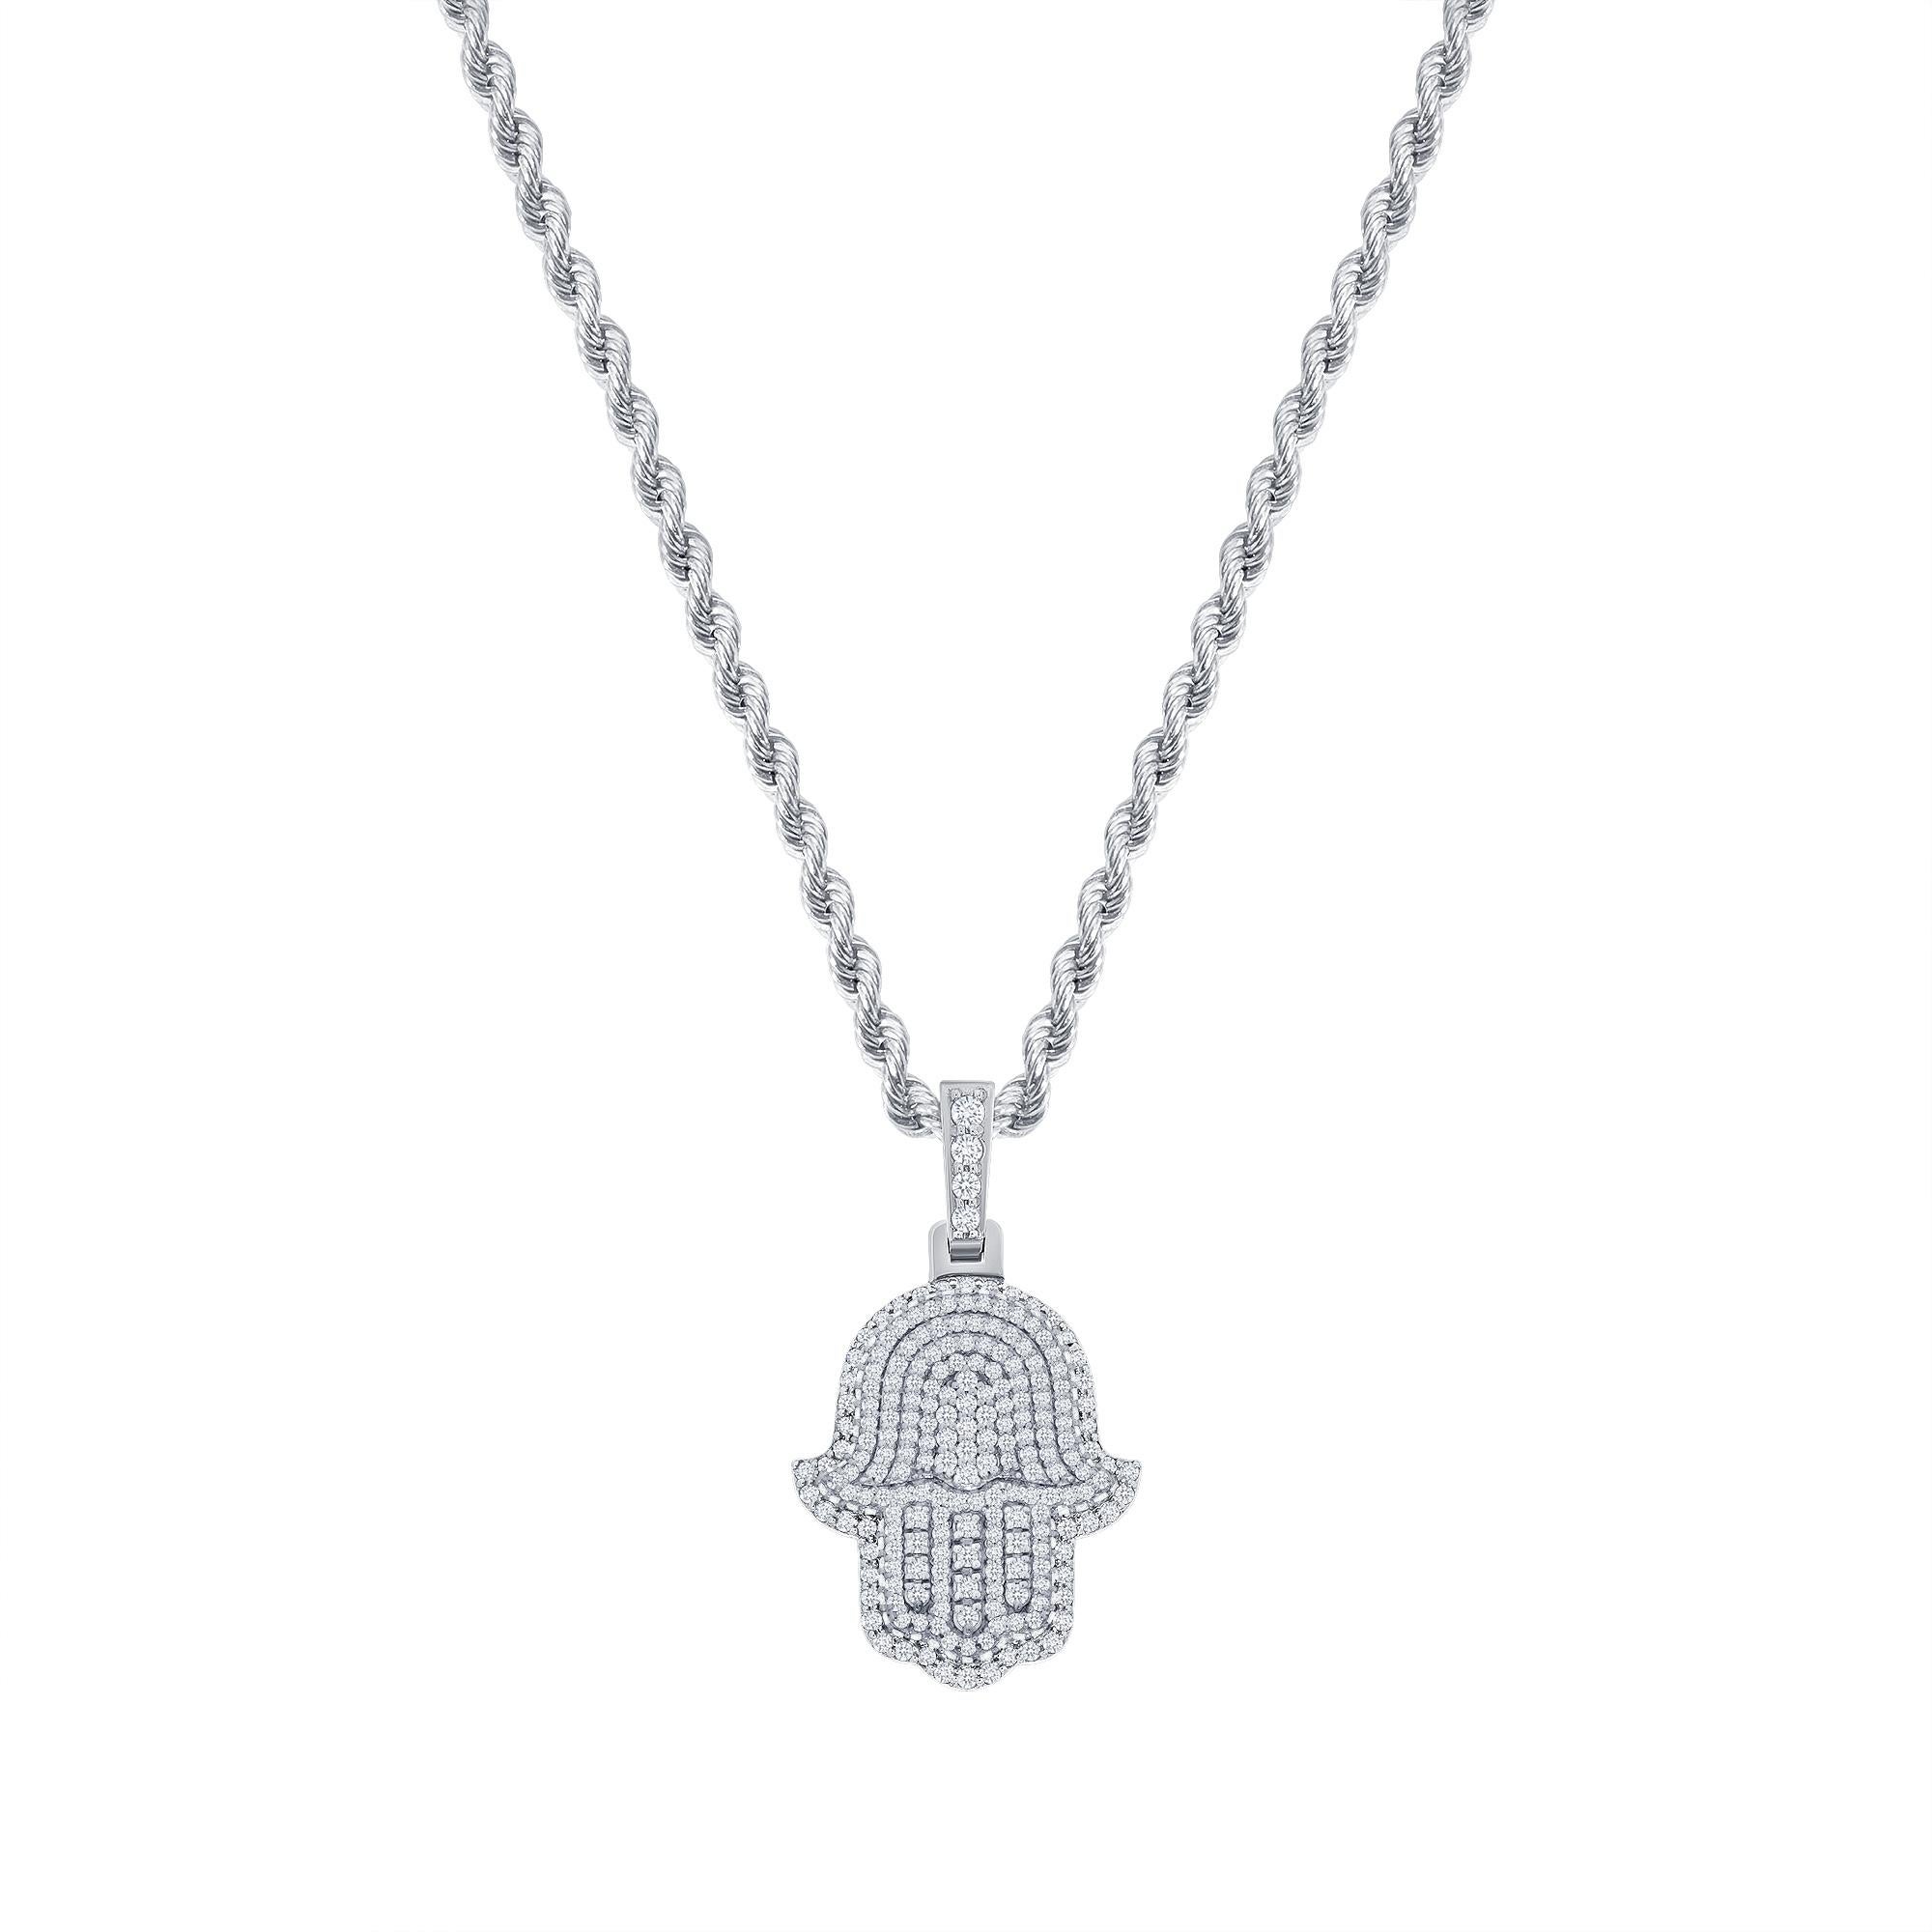 This Hamsa diamond necklace provides both a spiritual and fashionable on trend look. 

Metal: 14k Gold
Diamond Cut: Round
Total Diamond Carats: 2 Carats
Diamond Clarity: VS
Diamond Color: F-G
Necklace Length: 20 Inches
Color: White Gold
